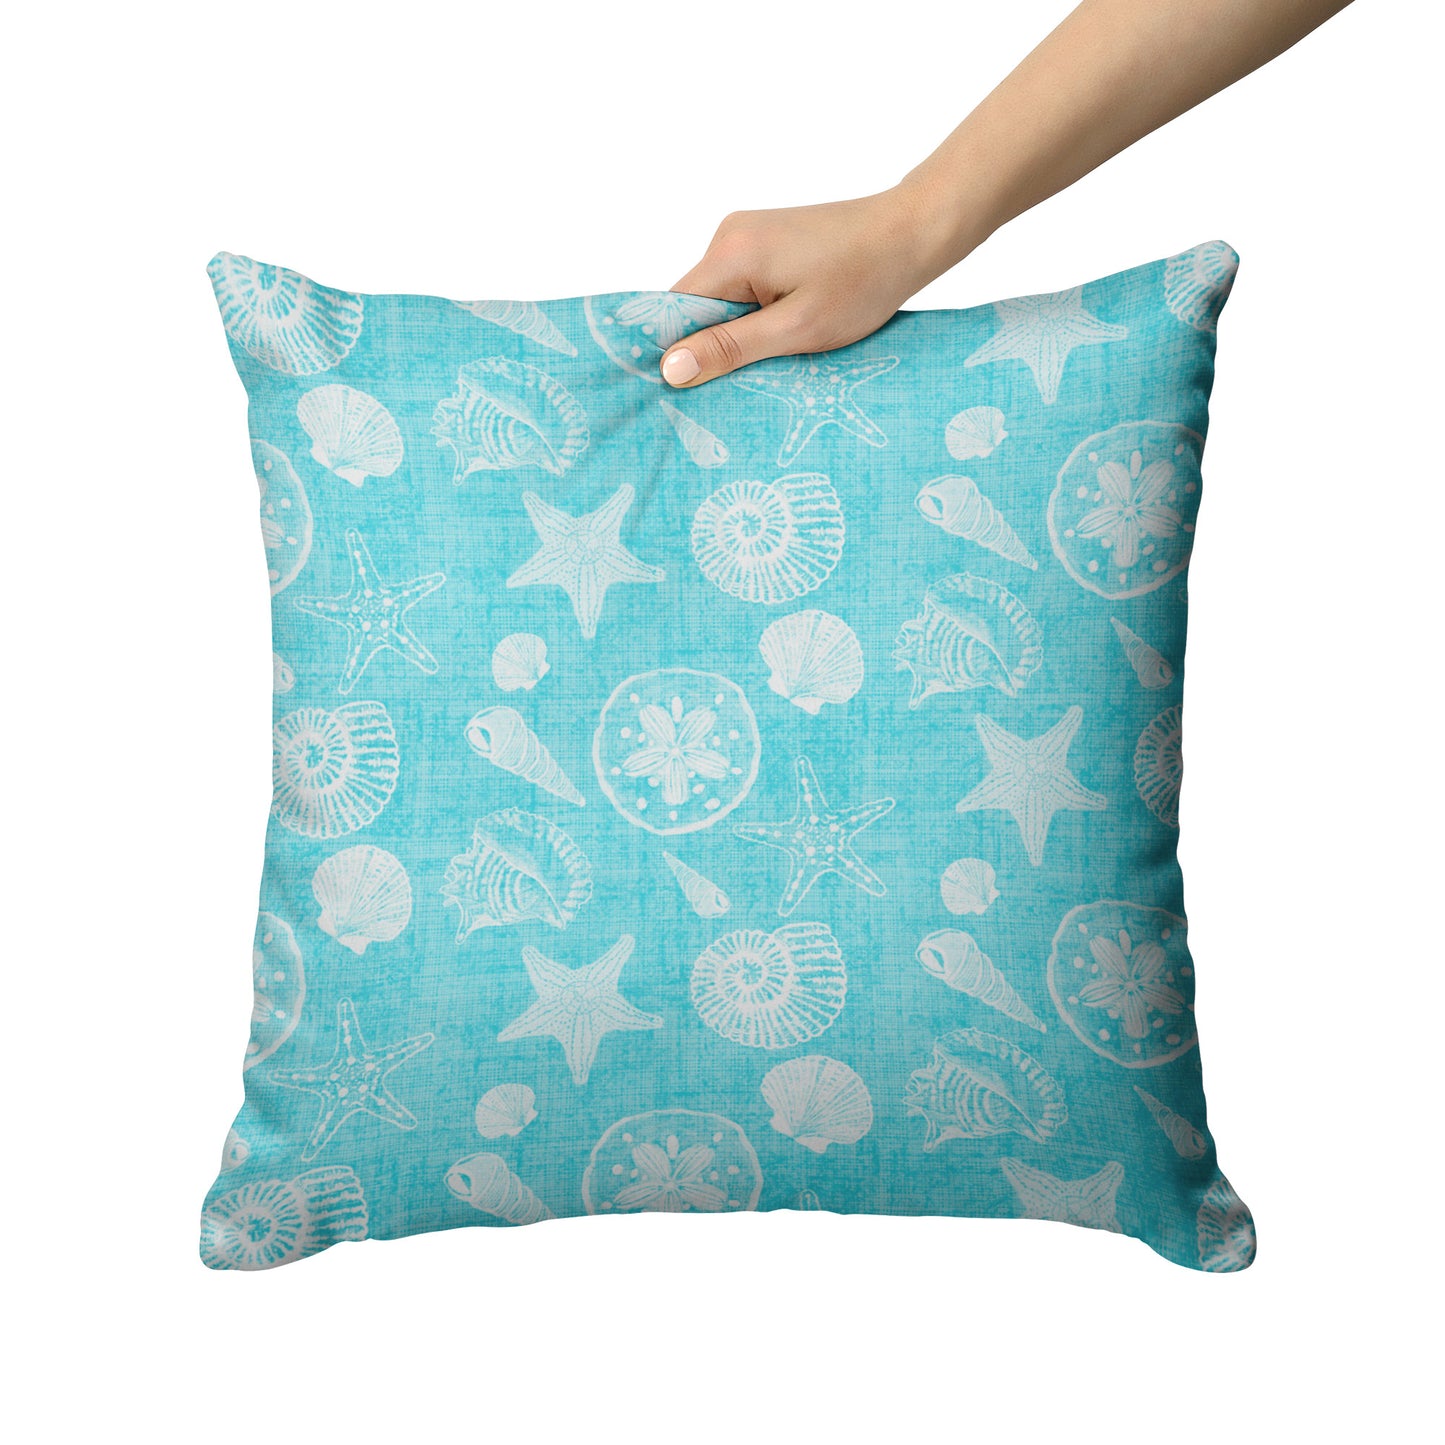 Seashell Sketches on Tropical Blue Linen Textured Background, Throw Pillow